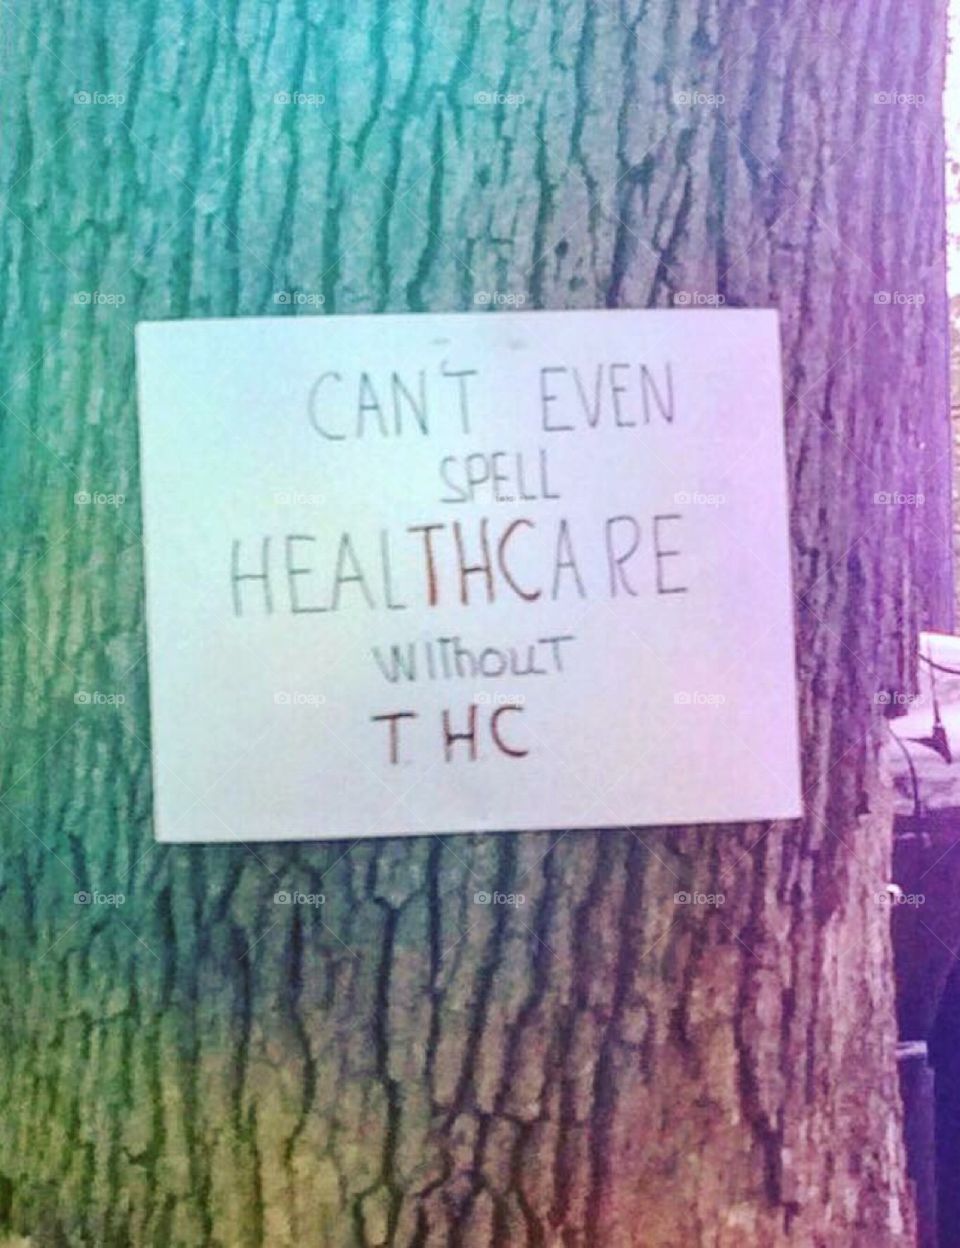 "Can't even spell healthcare, without THC."